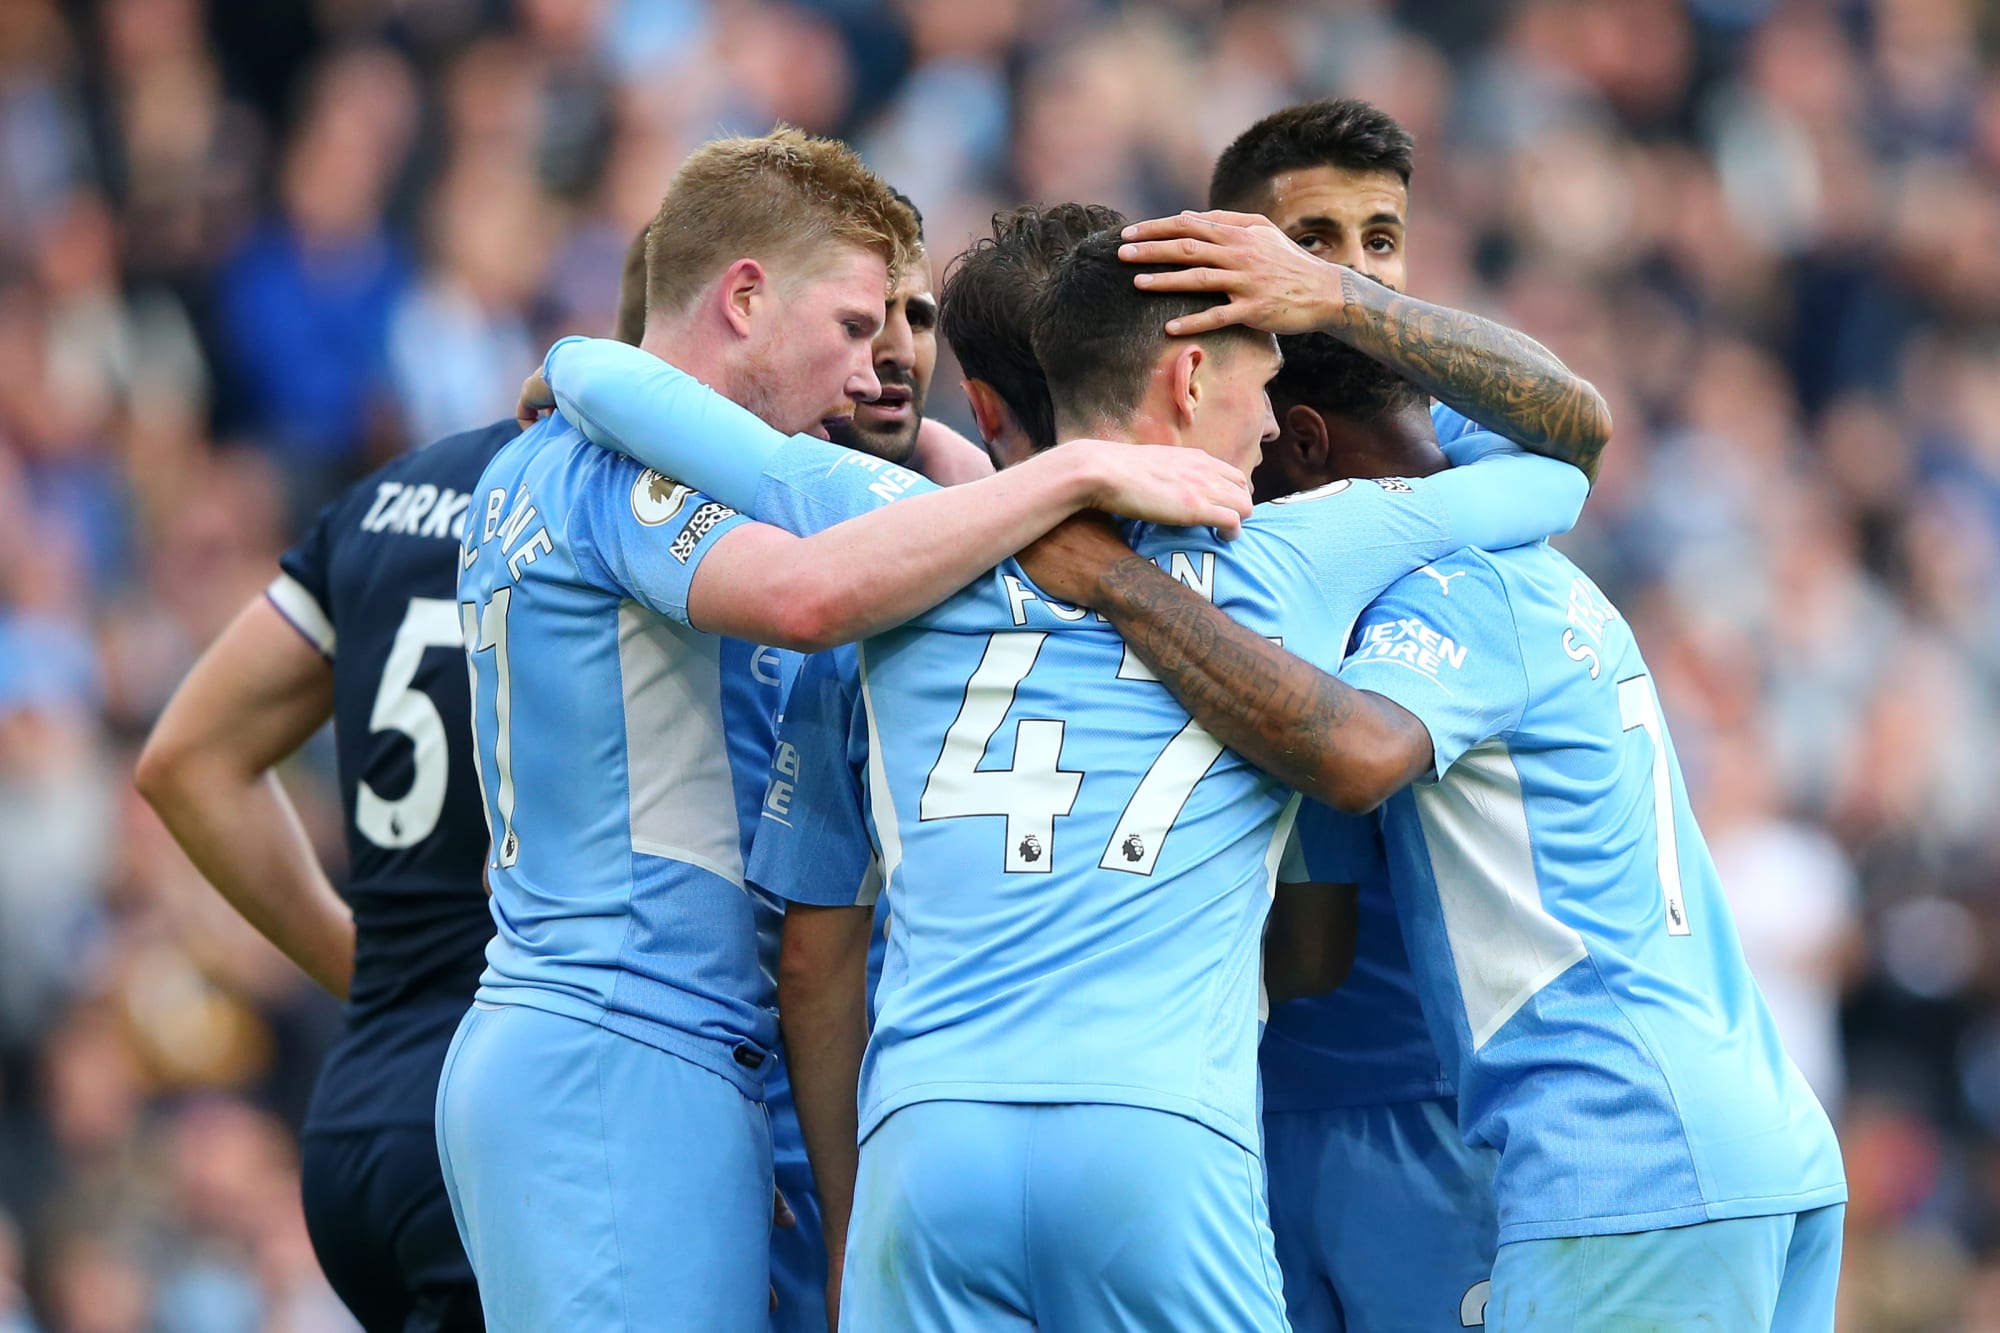 Another three points for Manchester City as they bag win against Burnley...